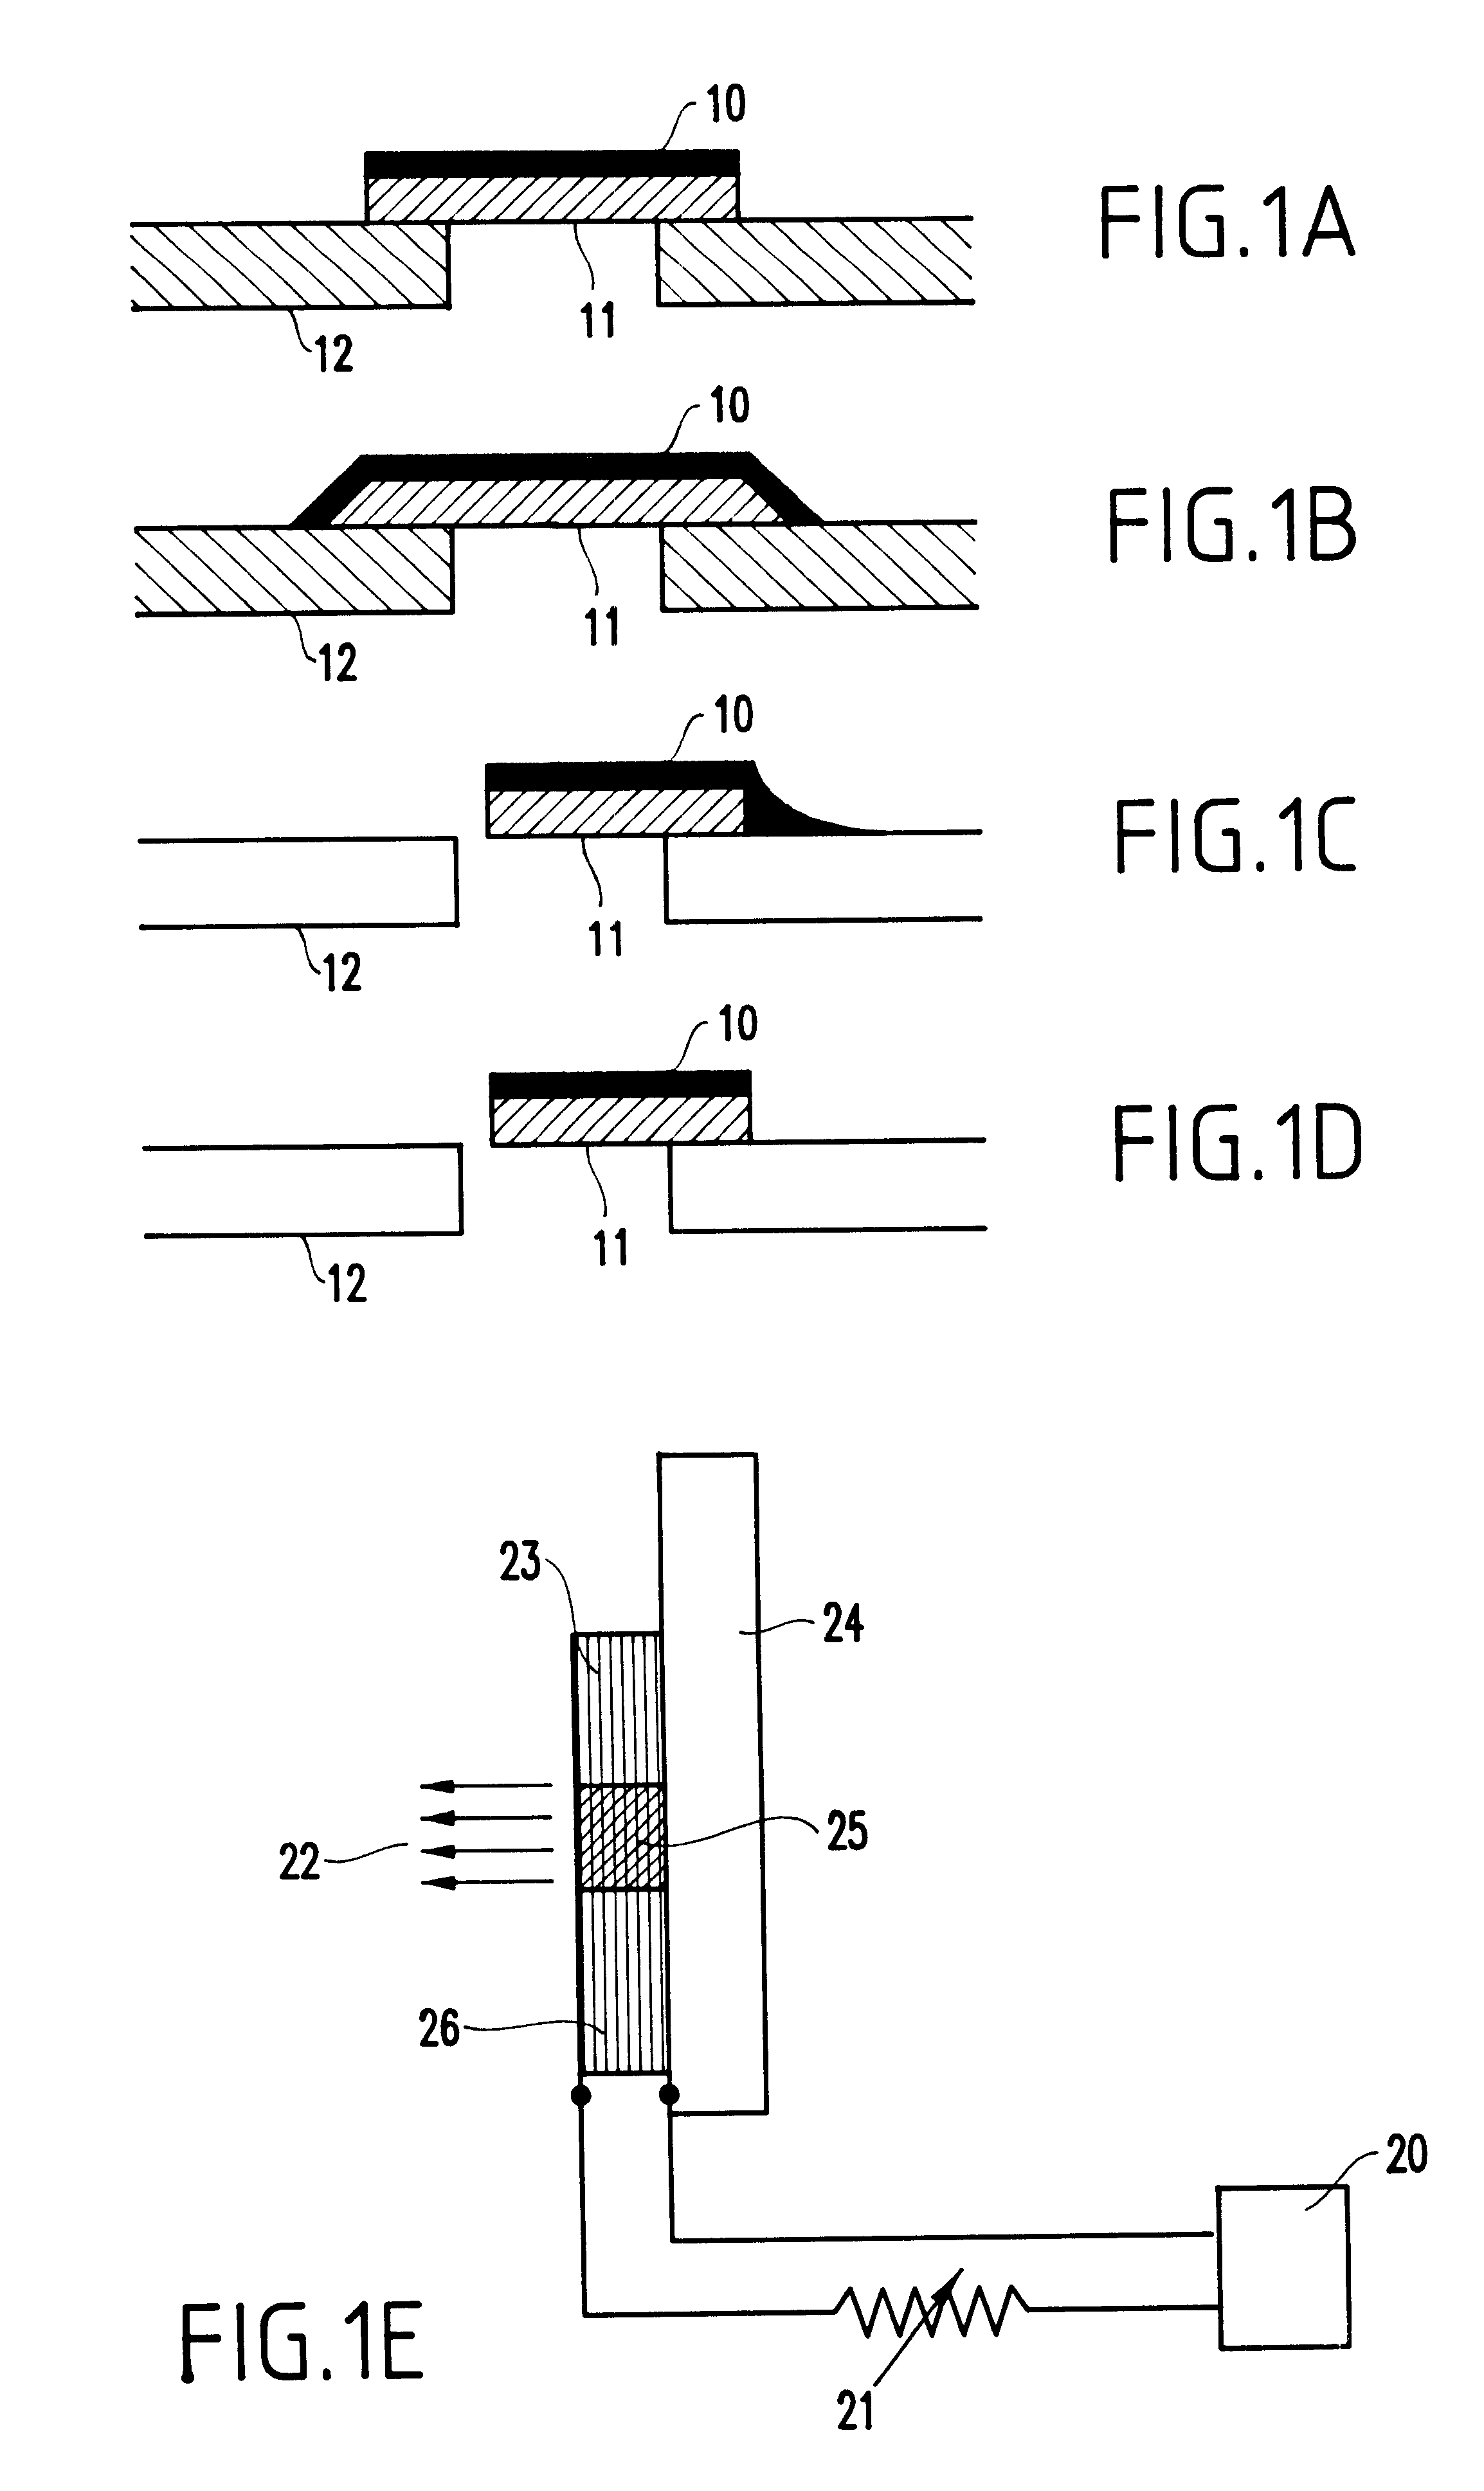 Filter circuit including system for tuning resonant structures to change resonant frequencies thereof